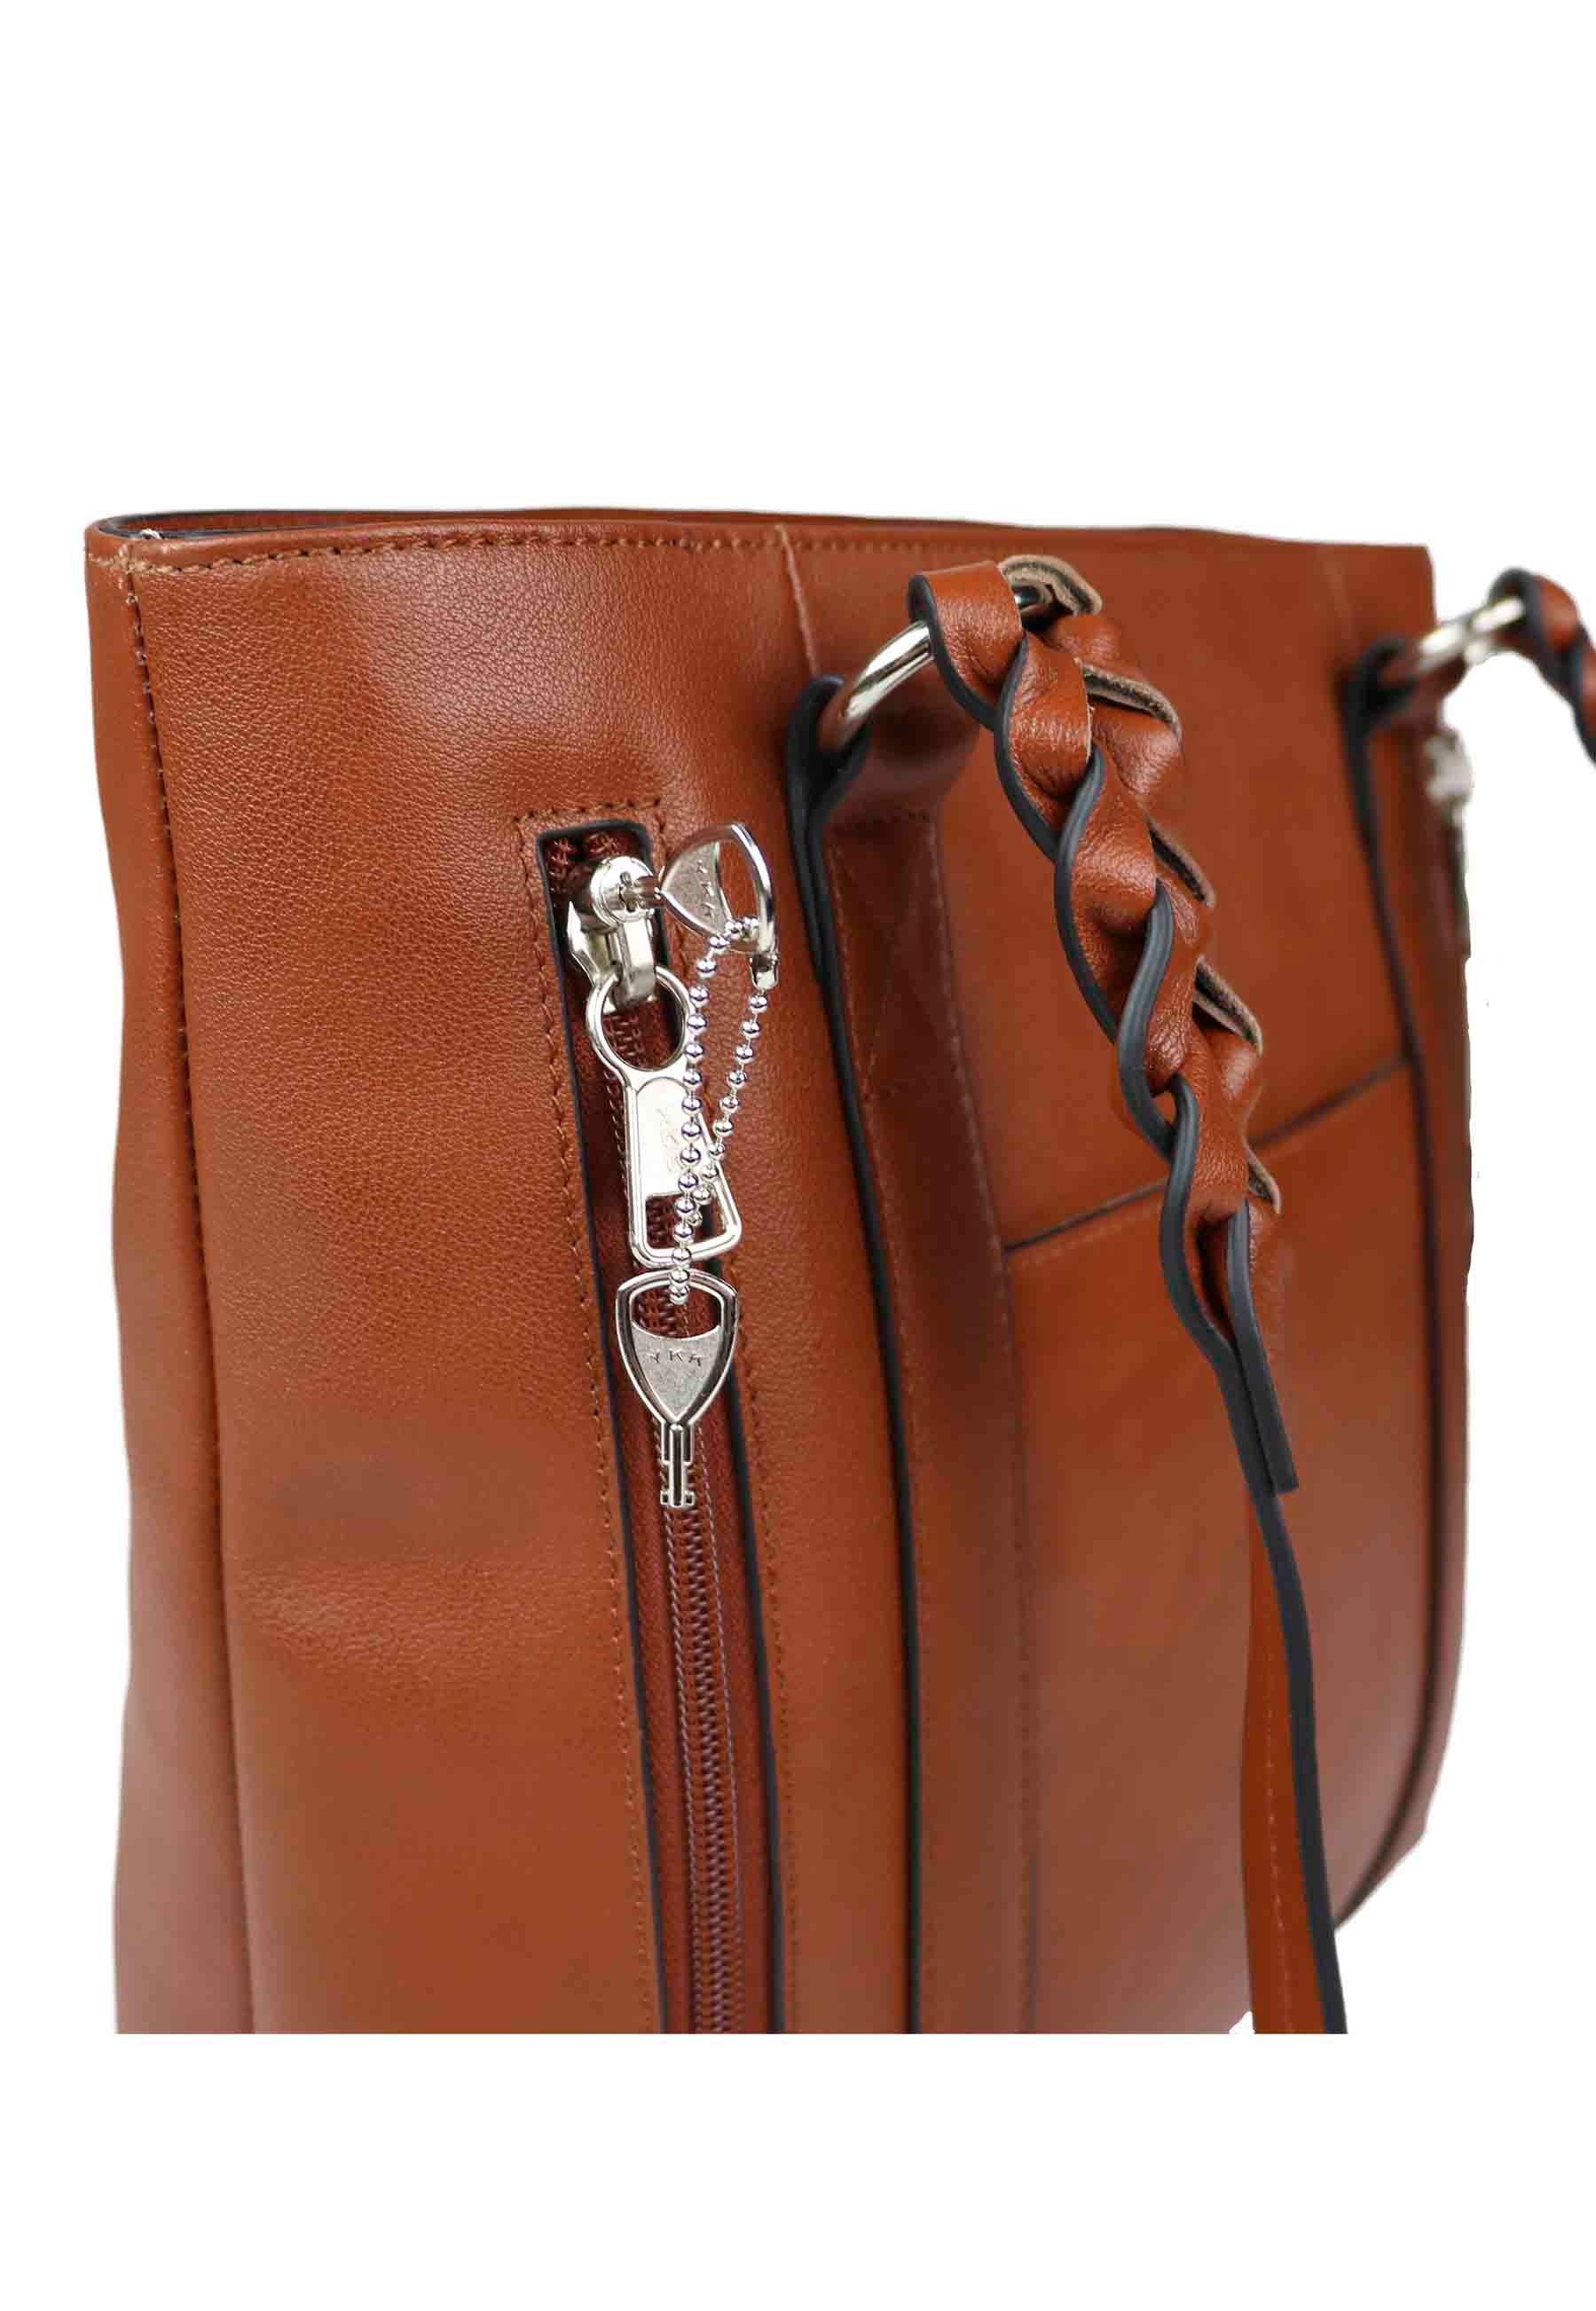 closeup view of locking zippers on leather conceal carry purse